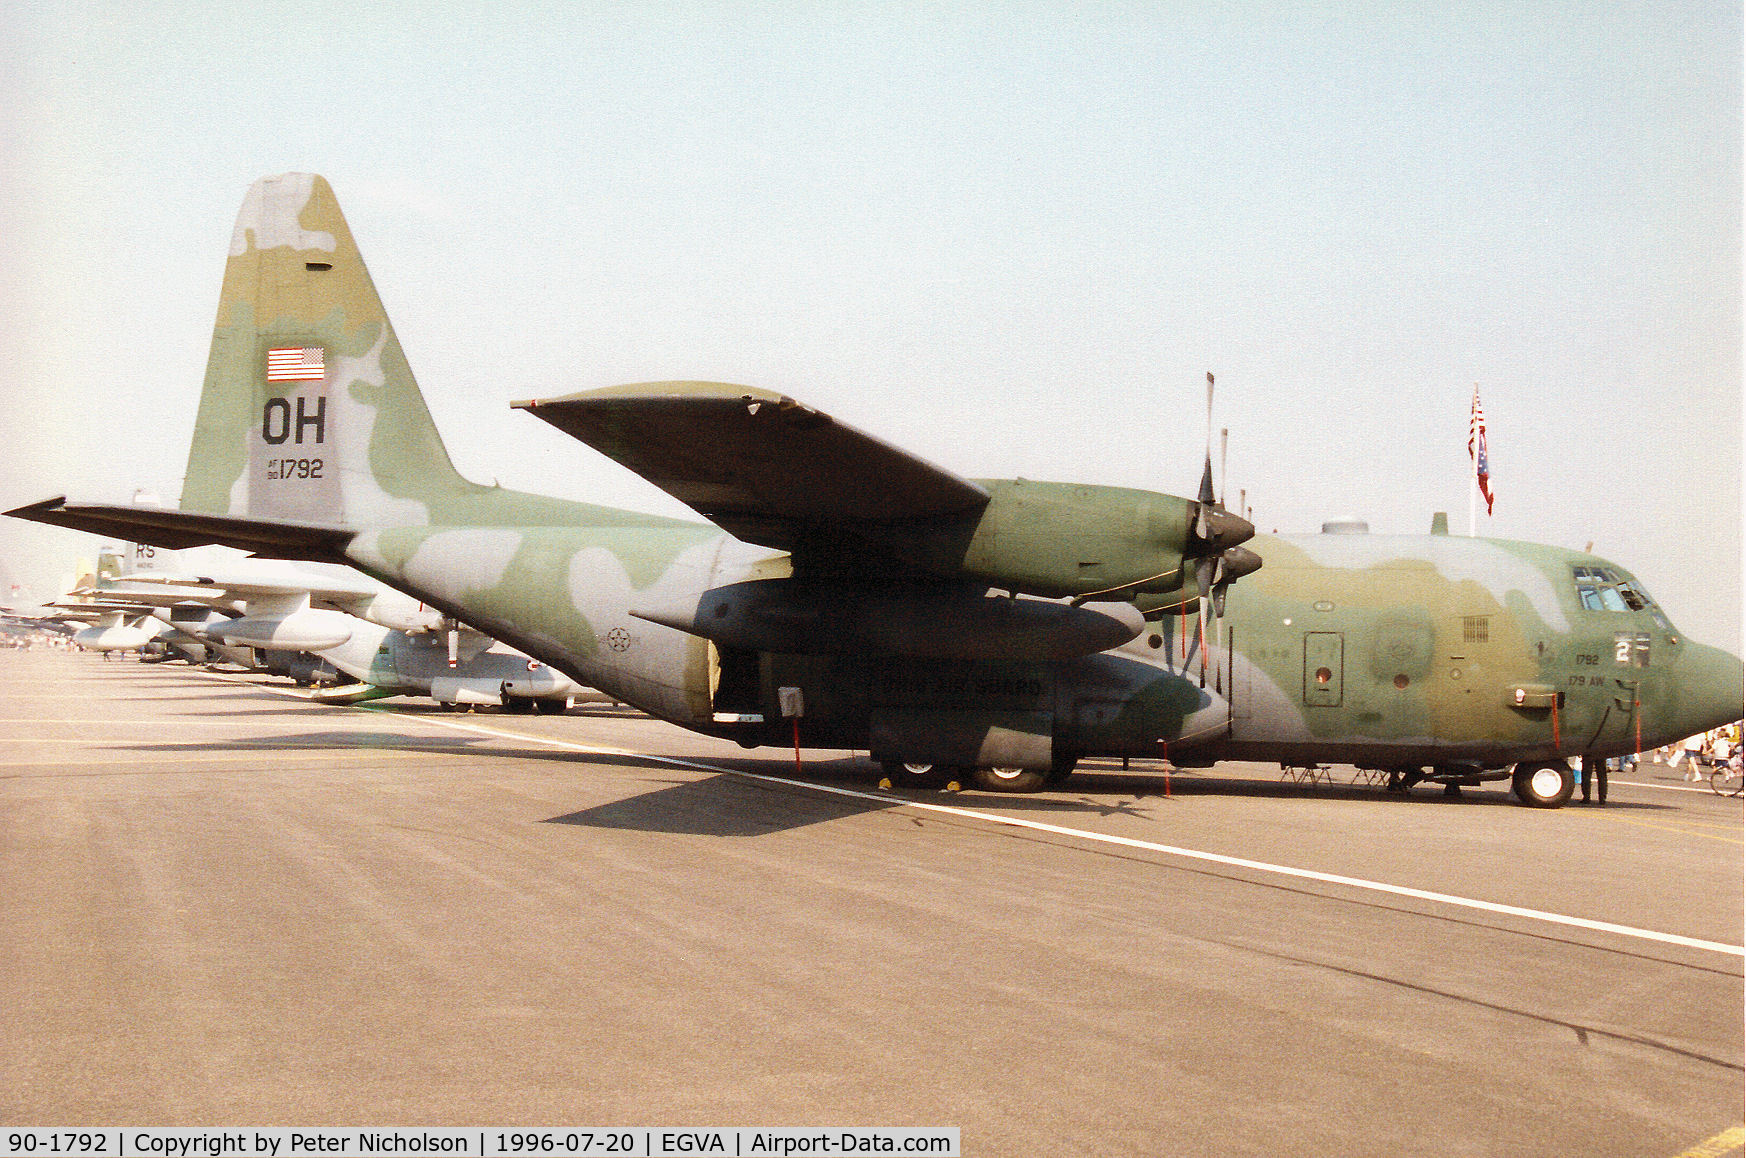 90-1792, 1991 Lockheed C-130H Hercules C/N 382-5245, C-130H Hercules named Spirit of Ontario of the 164th Airlift Squadron Ohio ANG on display at the 1996 Royal Intnl Air Tattoo at RAF Fairford.